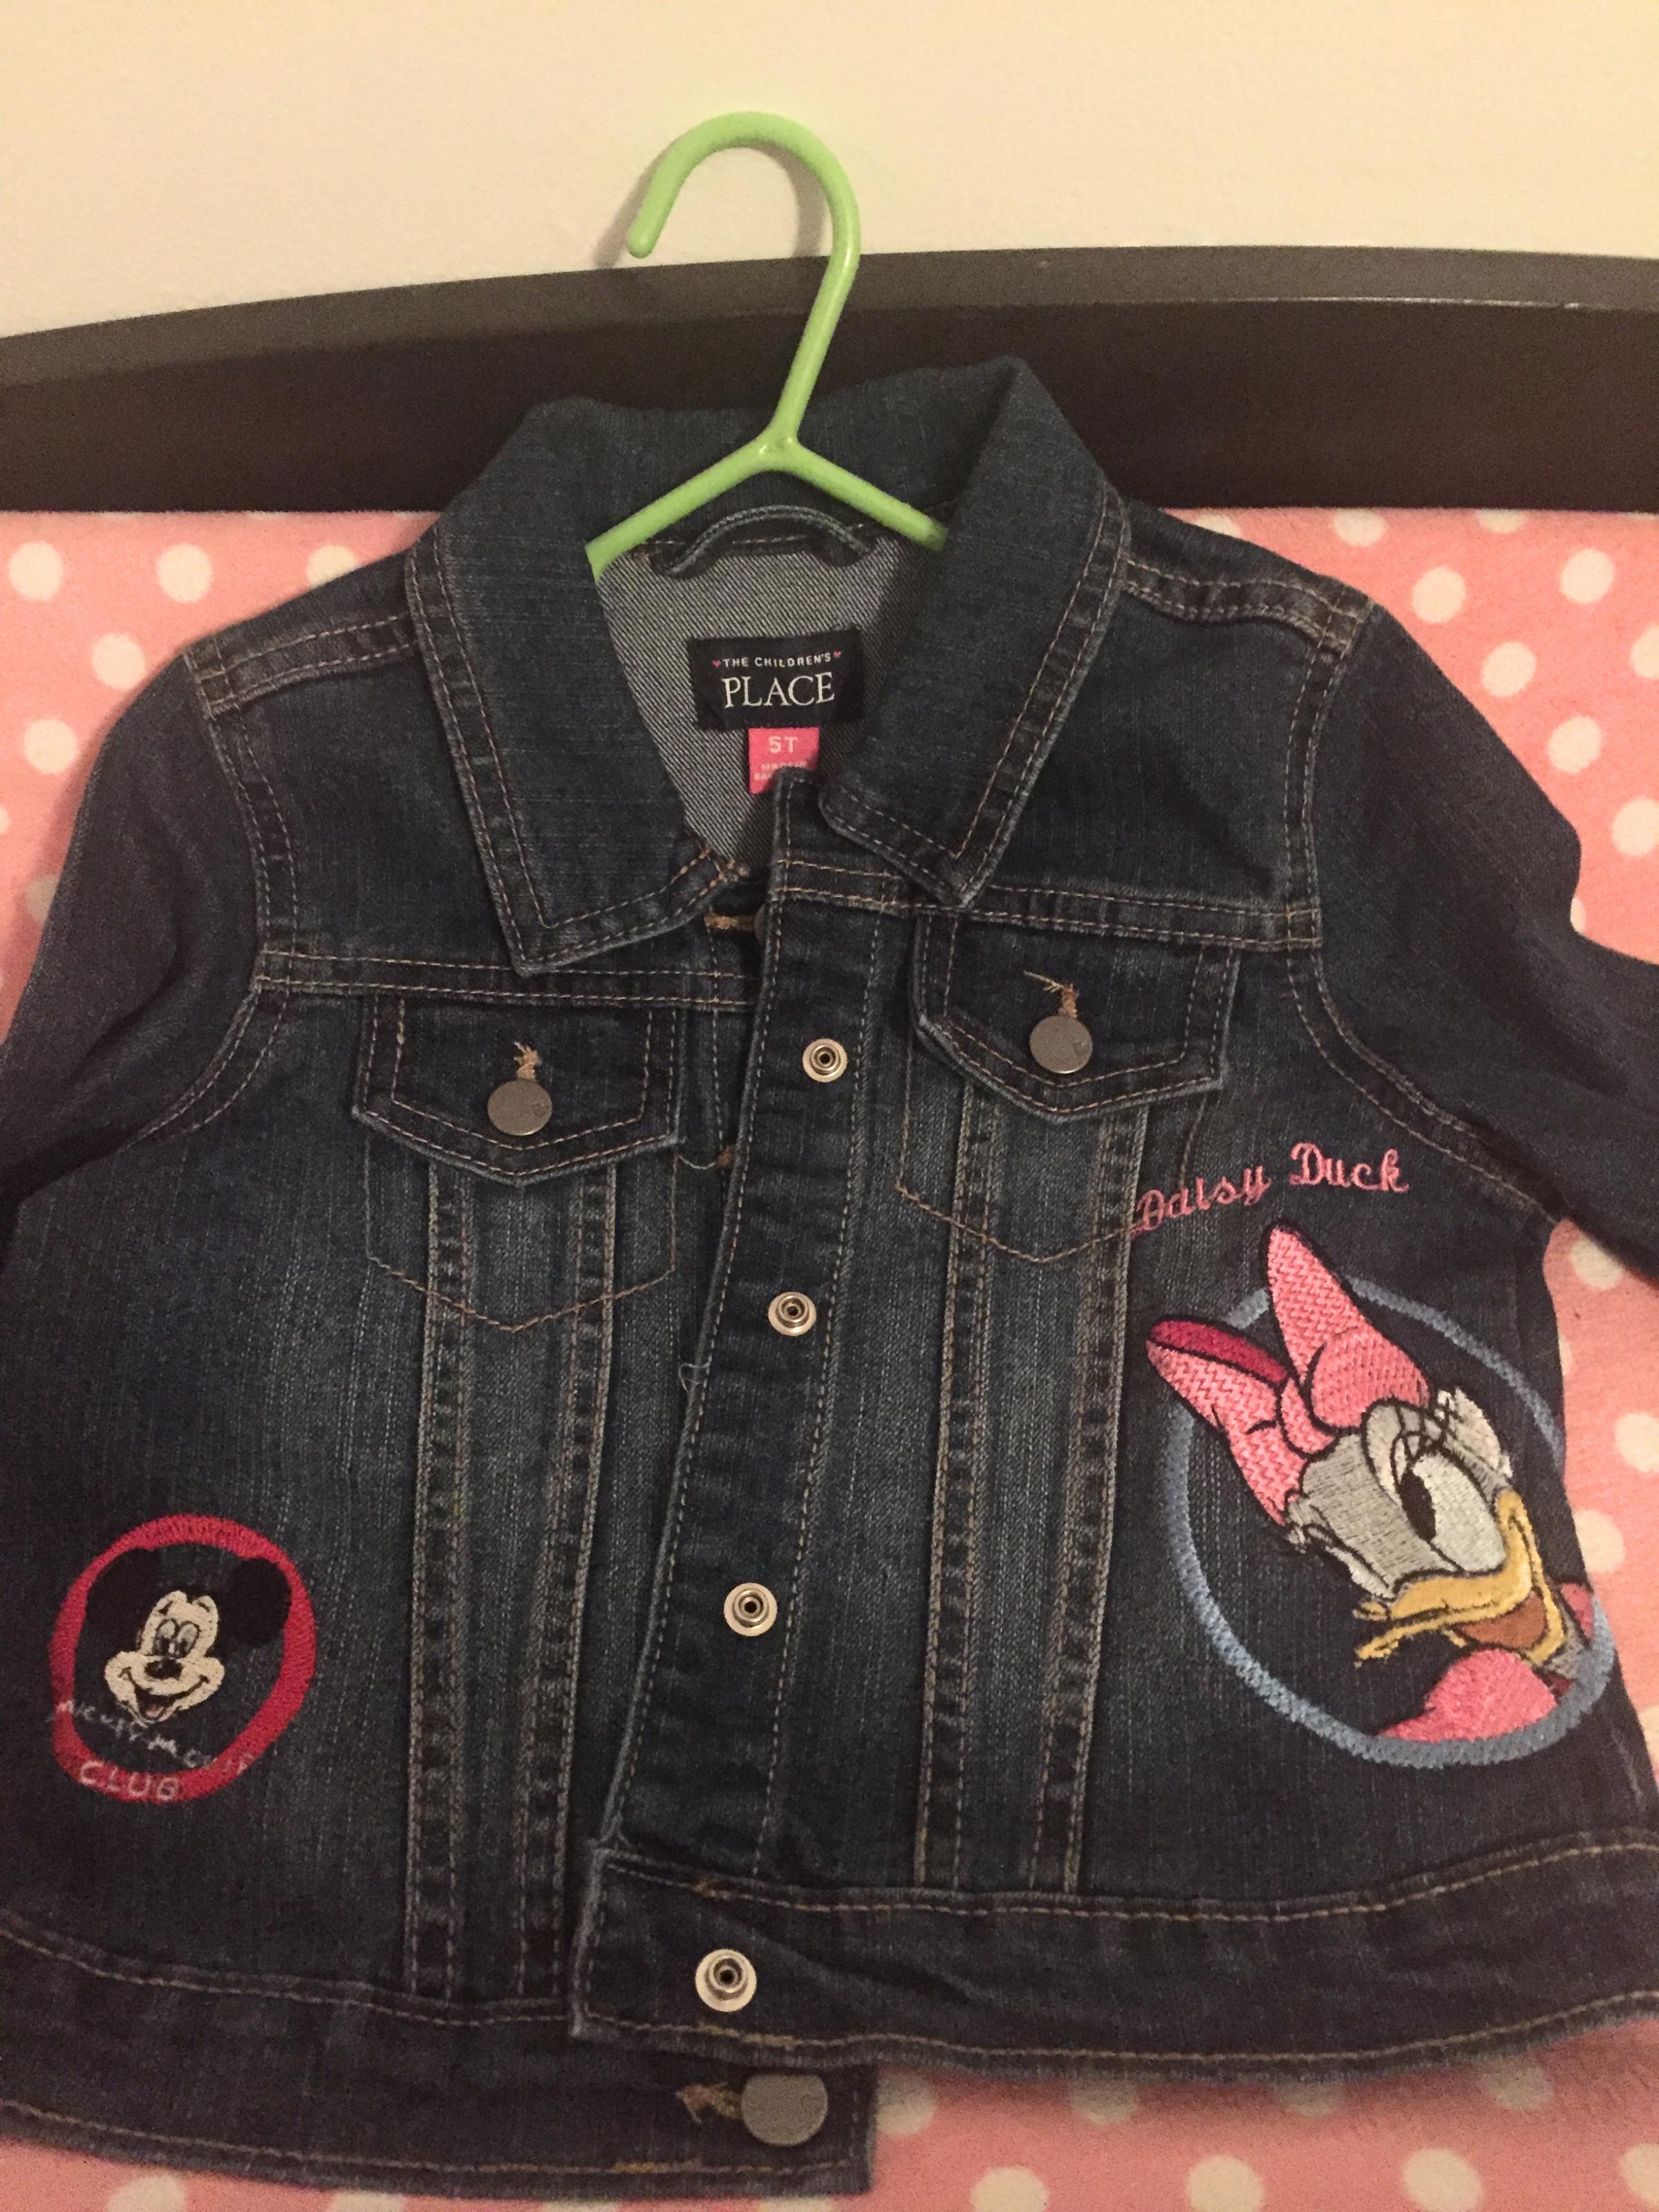 Embroidered jacket with Daisy duck and Mickey Mouse designs